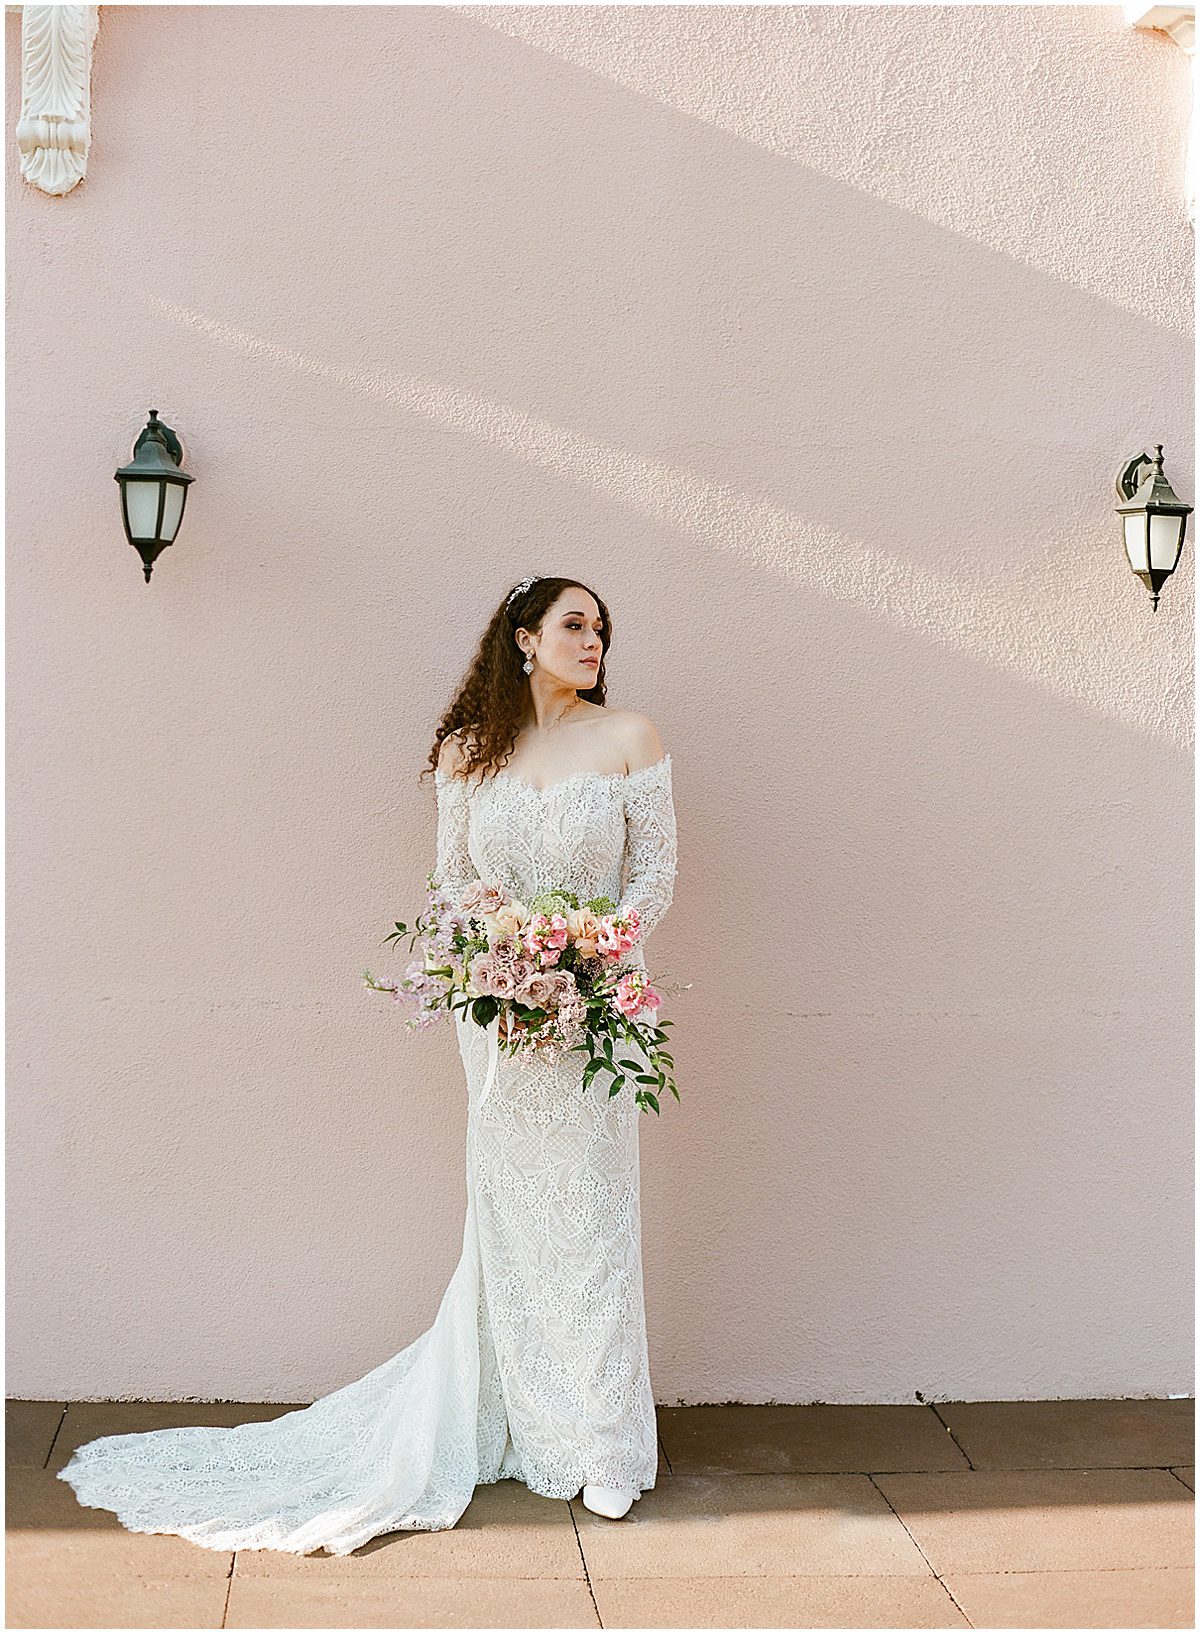 Bride in Lace Dress Holding Bouquet In Front of Pink Wall Photo